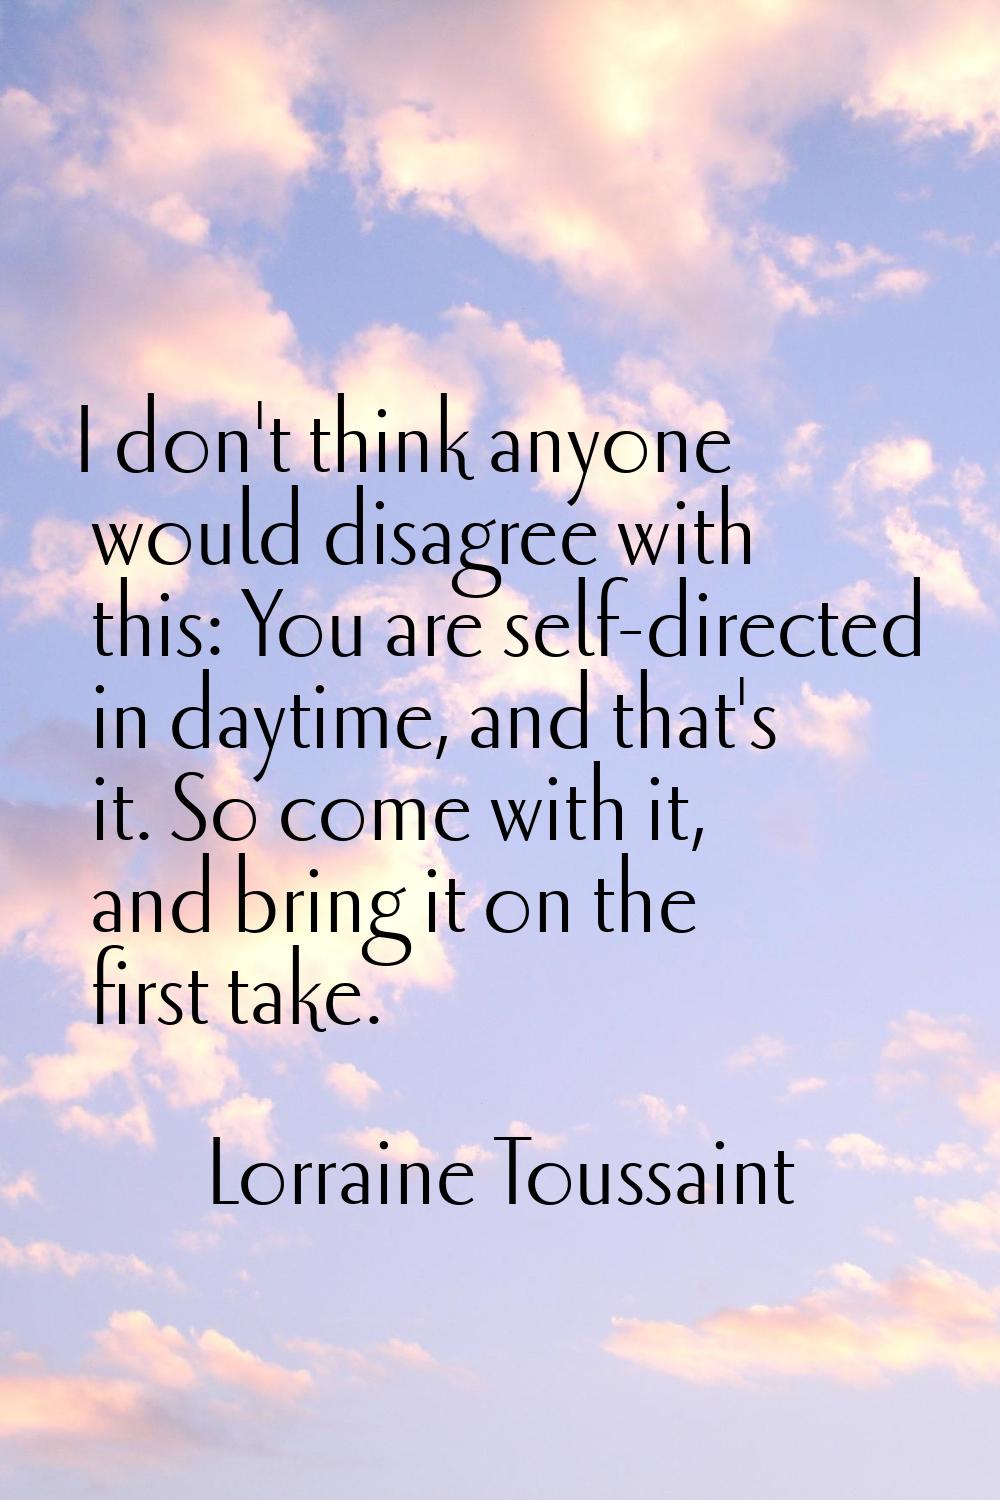 I don't think anyone would disagree with this: You are self-directed in daytime, and that's it. So 